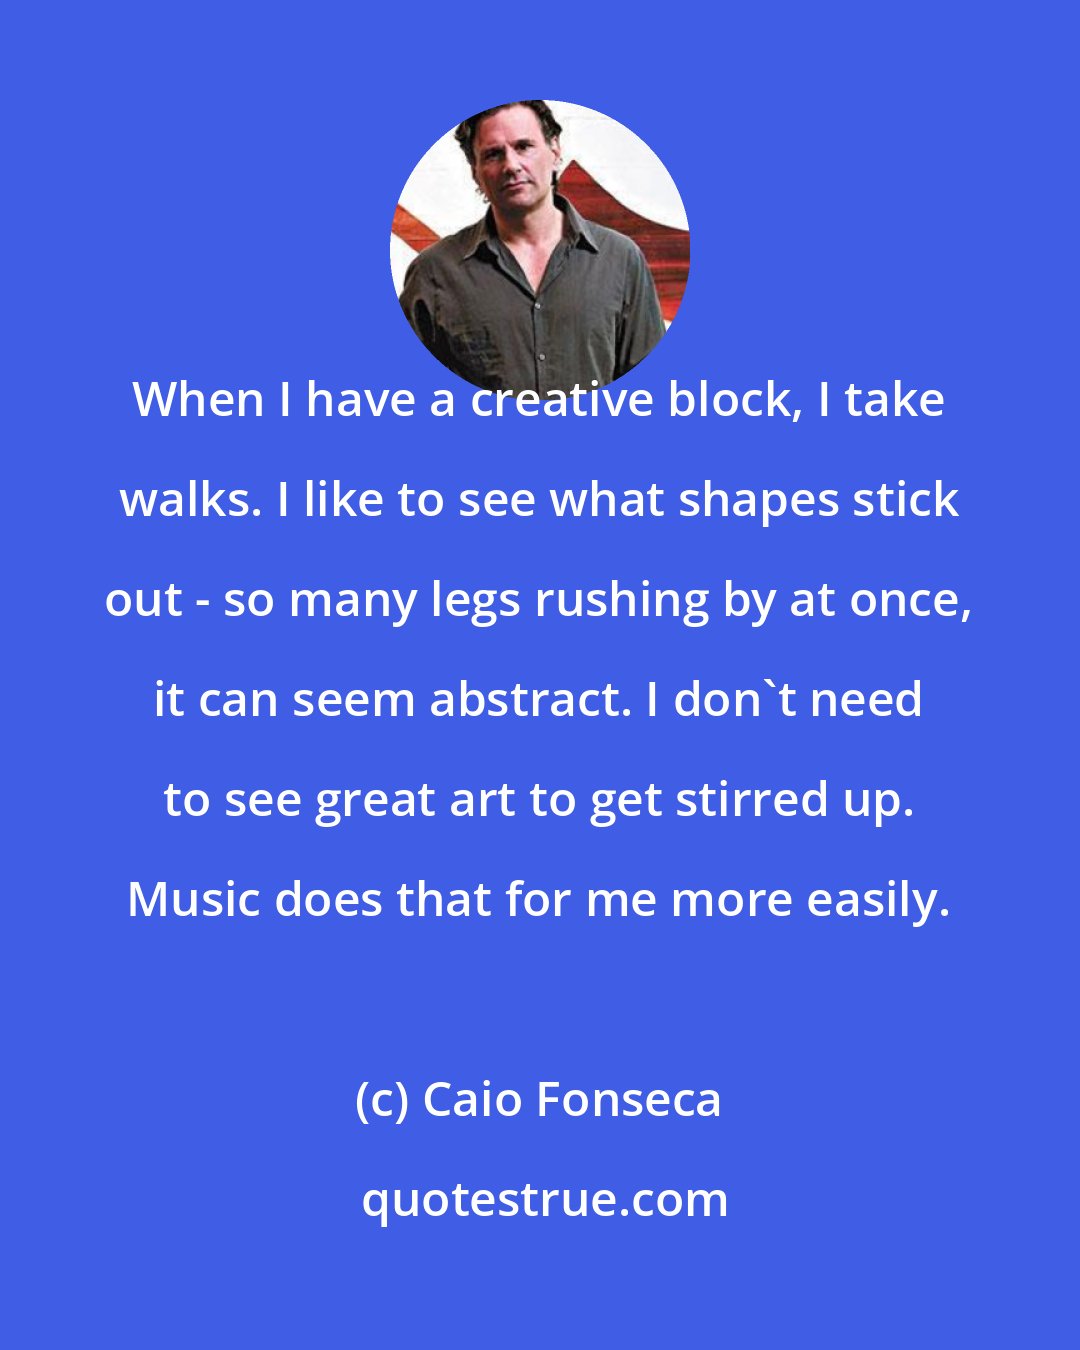 Caio Fonseca: When I have a creative block, I take walks. I like to see what shapes stick out - so many legs rushing by at once, it can seem abstract. I don't need to see great art to get stirred up. Music does that for me more easily.